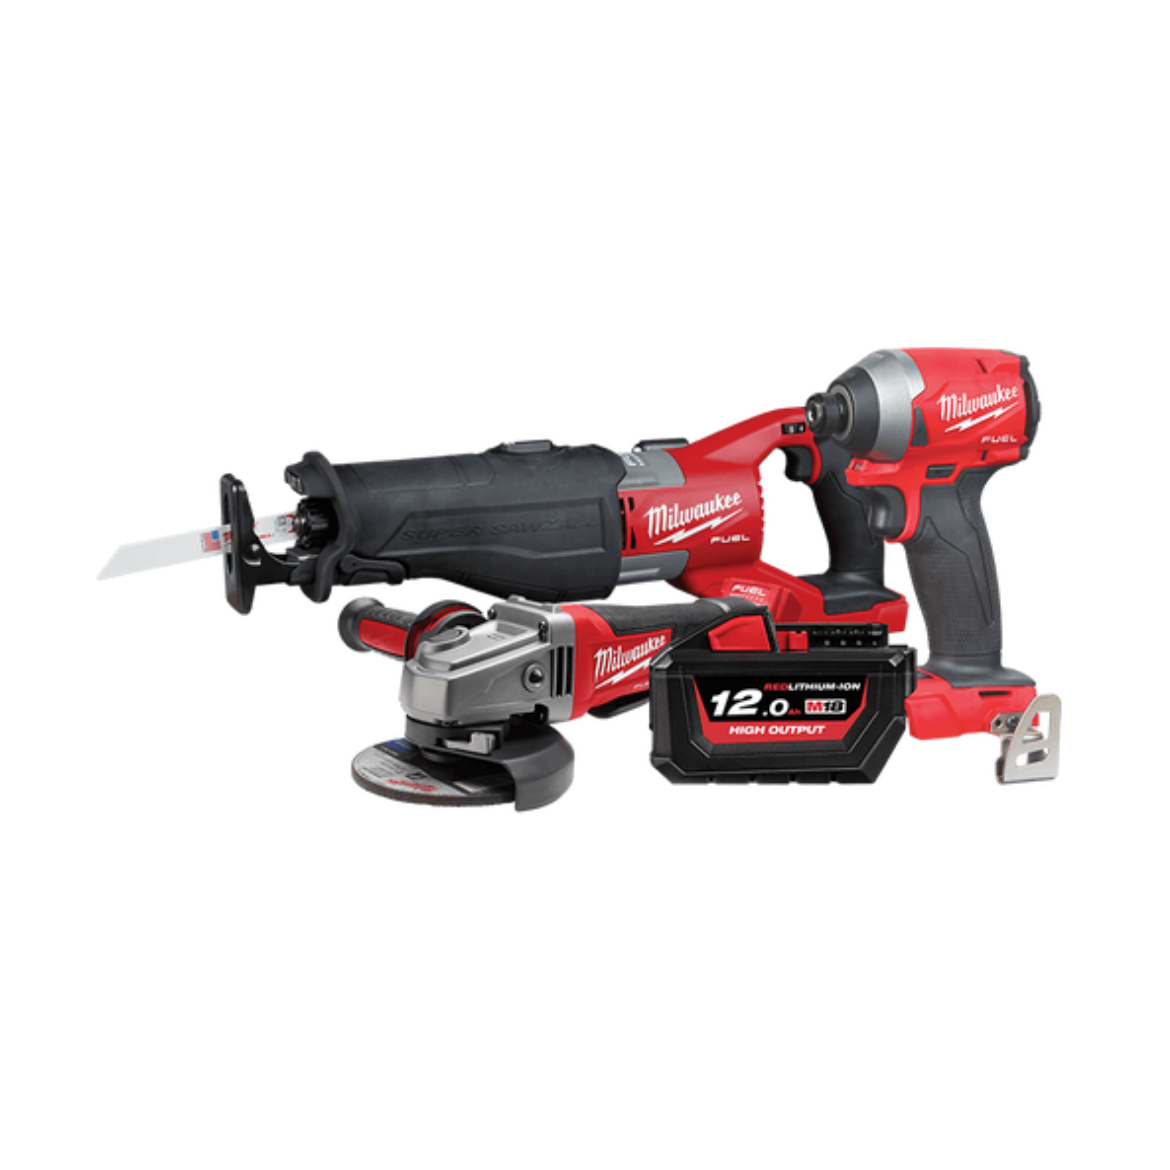 Picture of MILWAUKEE 3PC KIT M18 SABRE SAW, HEX IMPACT DRIVER, 5"GRINDER, 1X12Ah BATTERY